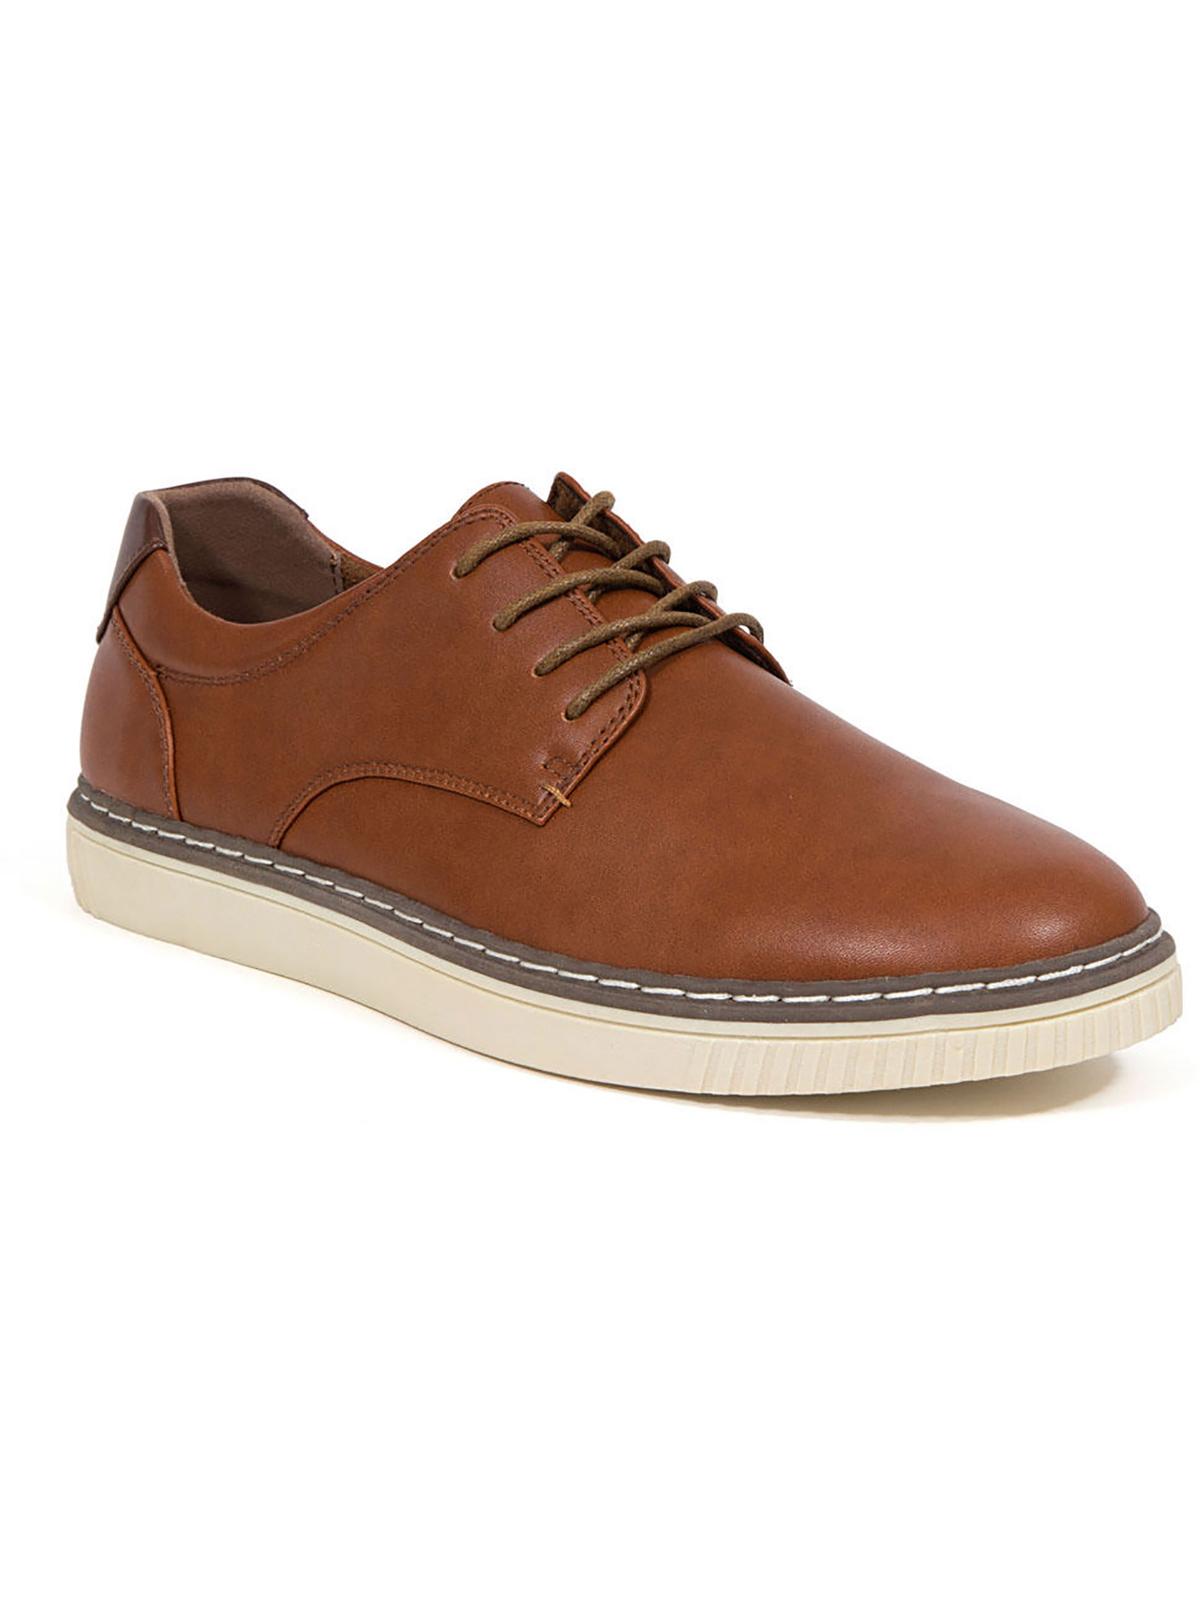 DEER STAGS Oakland Mens Faux Leather Lace Up Oxfords